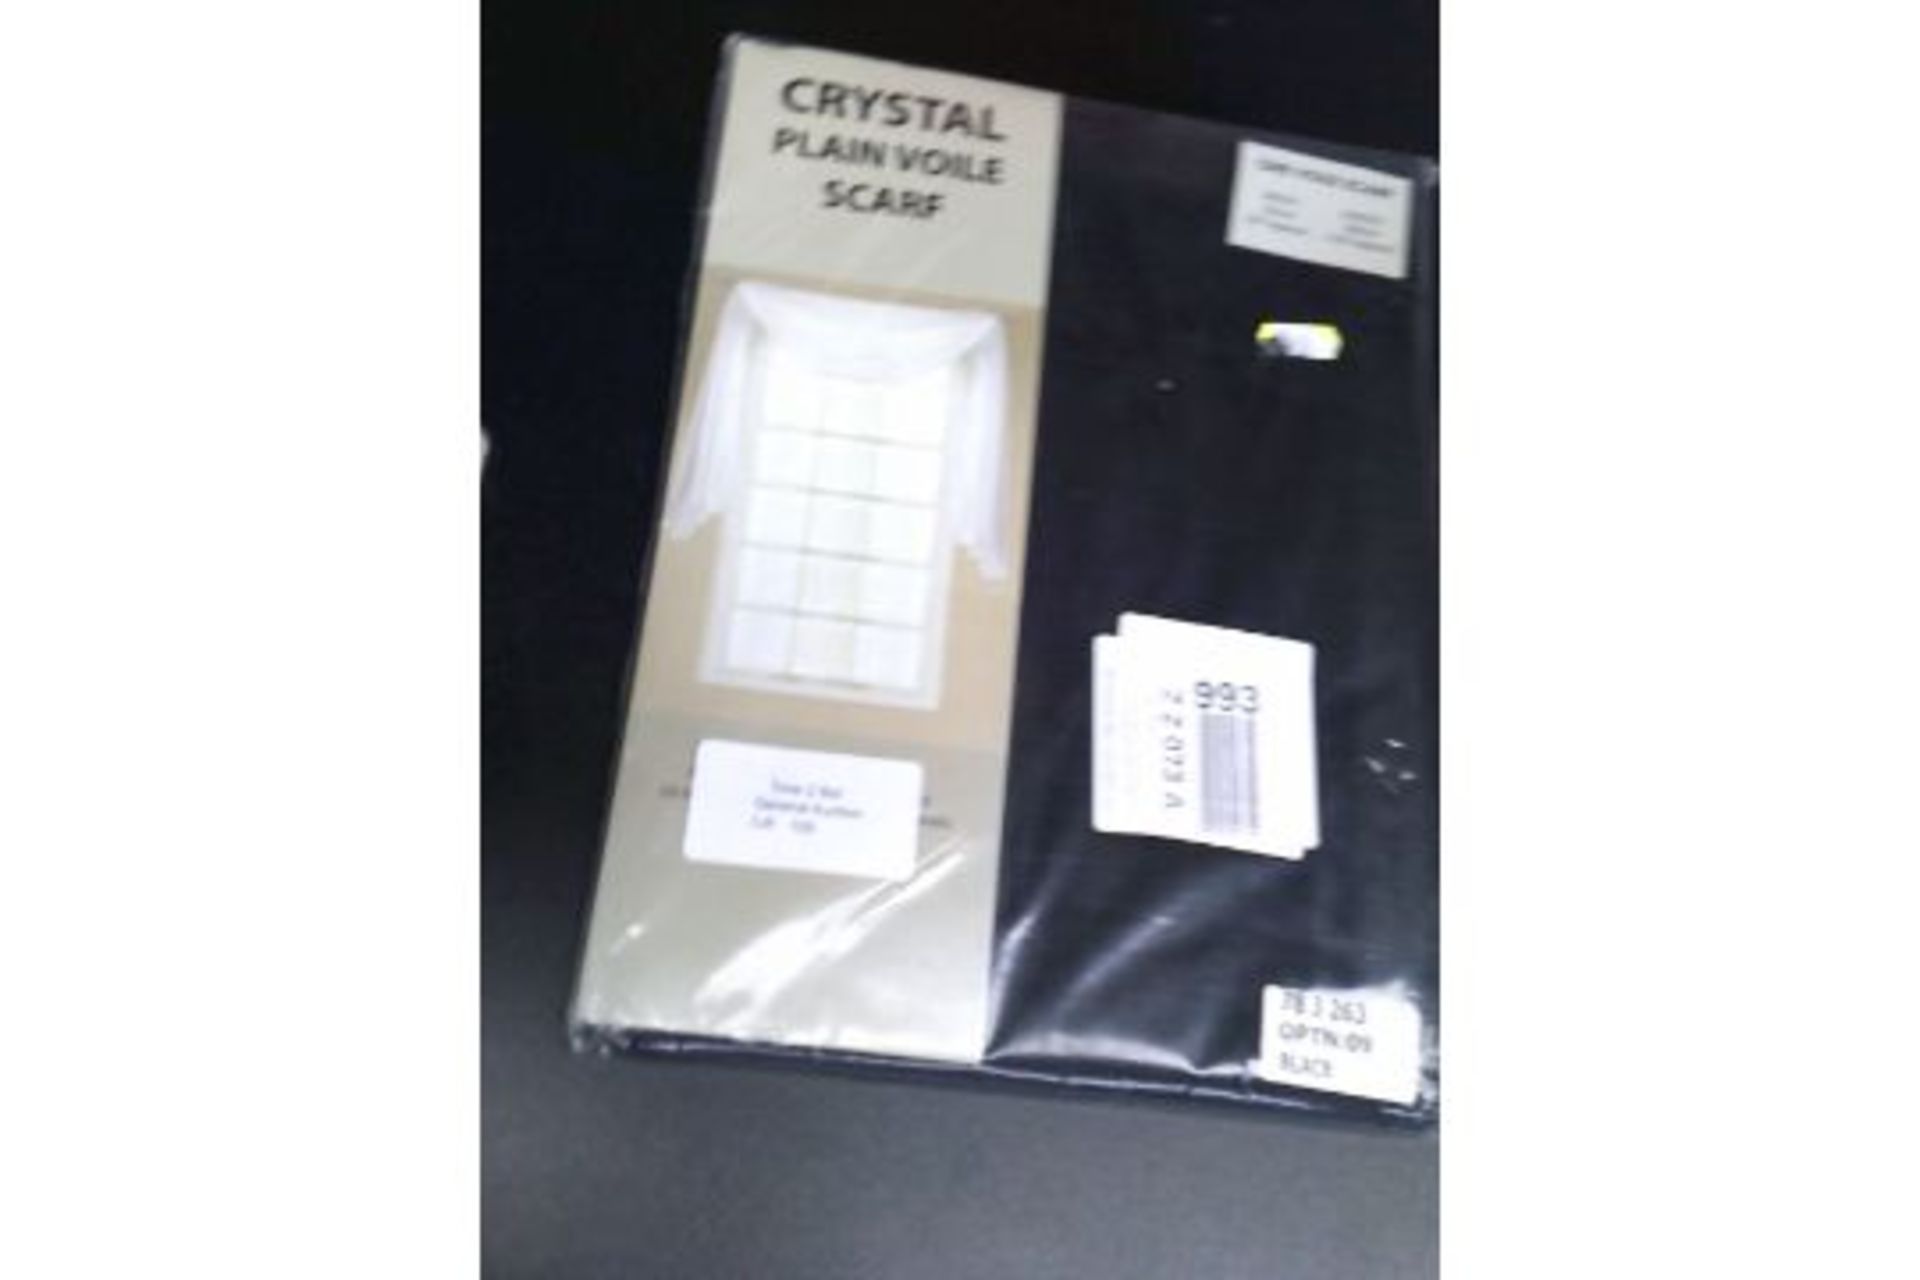 Crystal plain voile curtain width 145cm length 300cm (Delivery Band A)